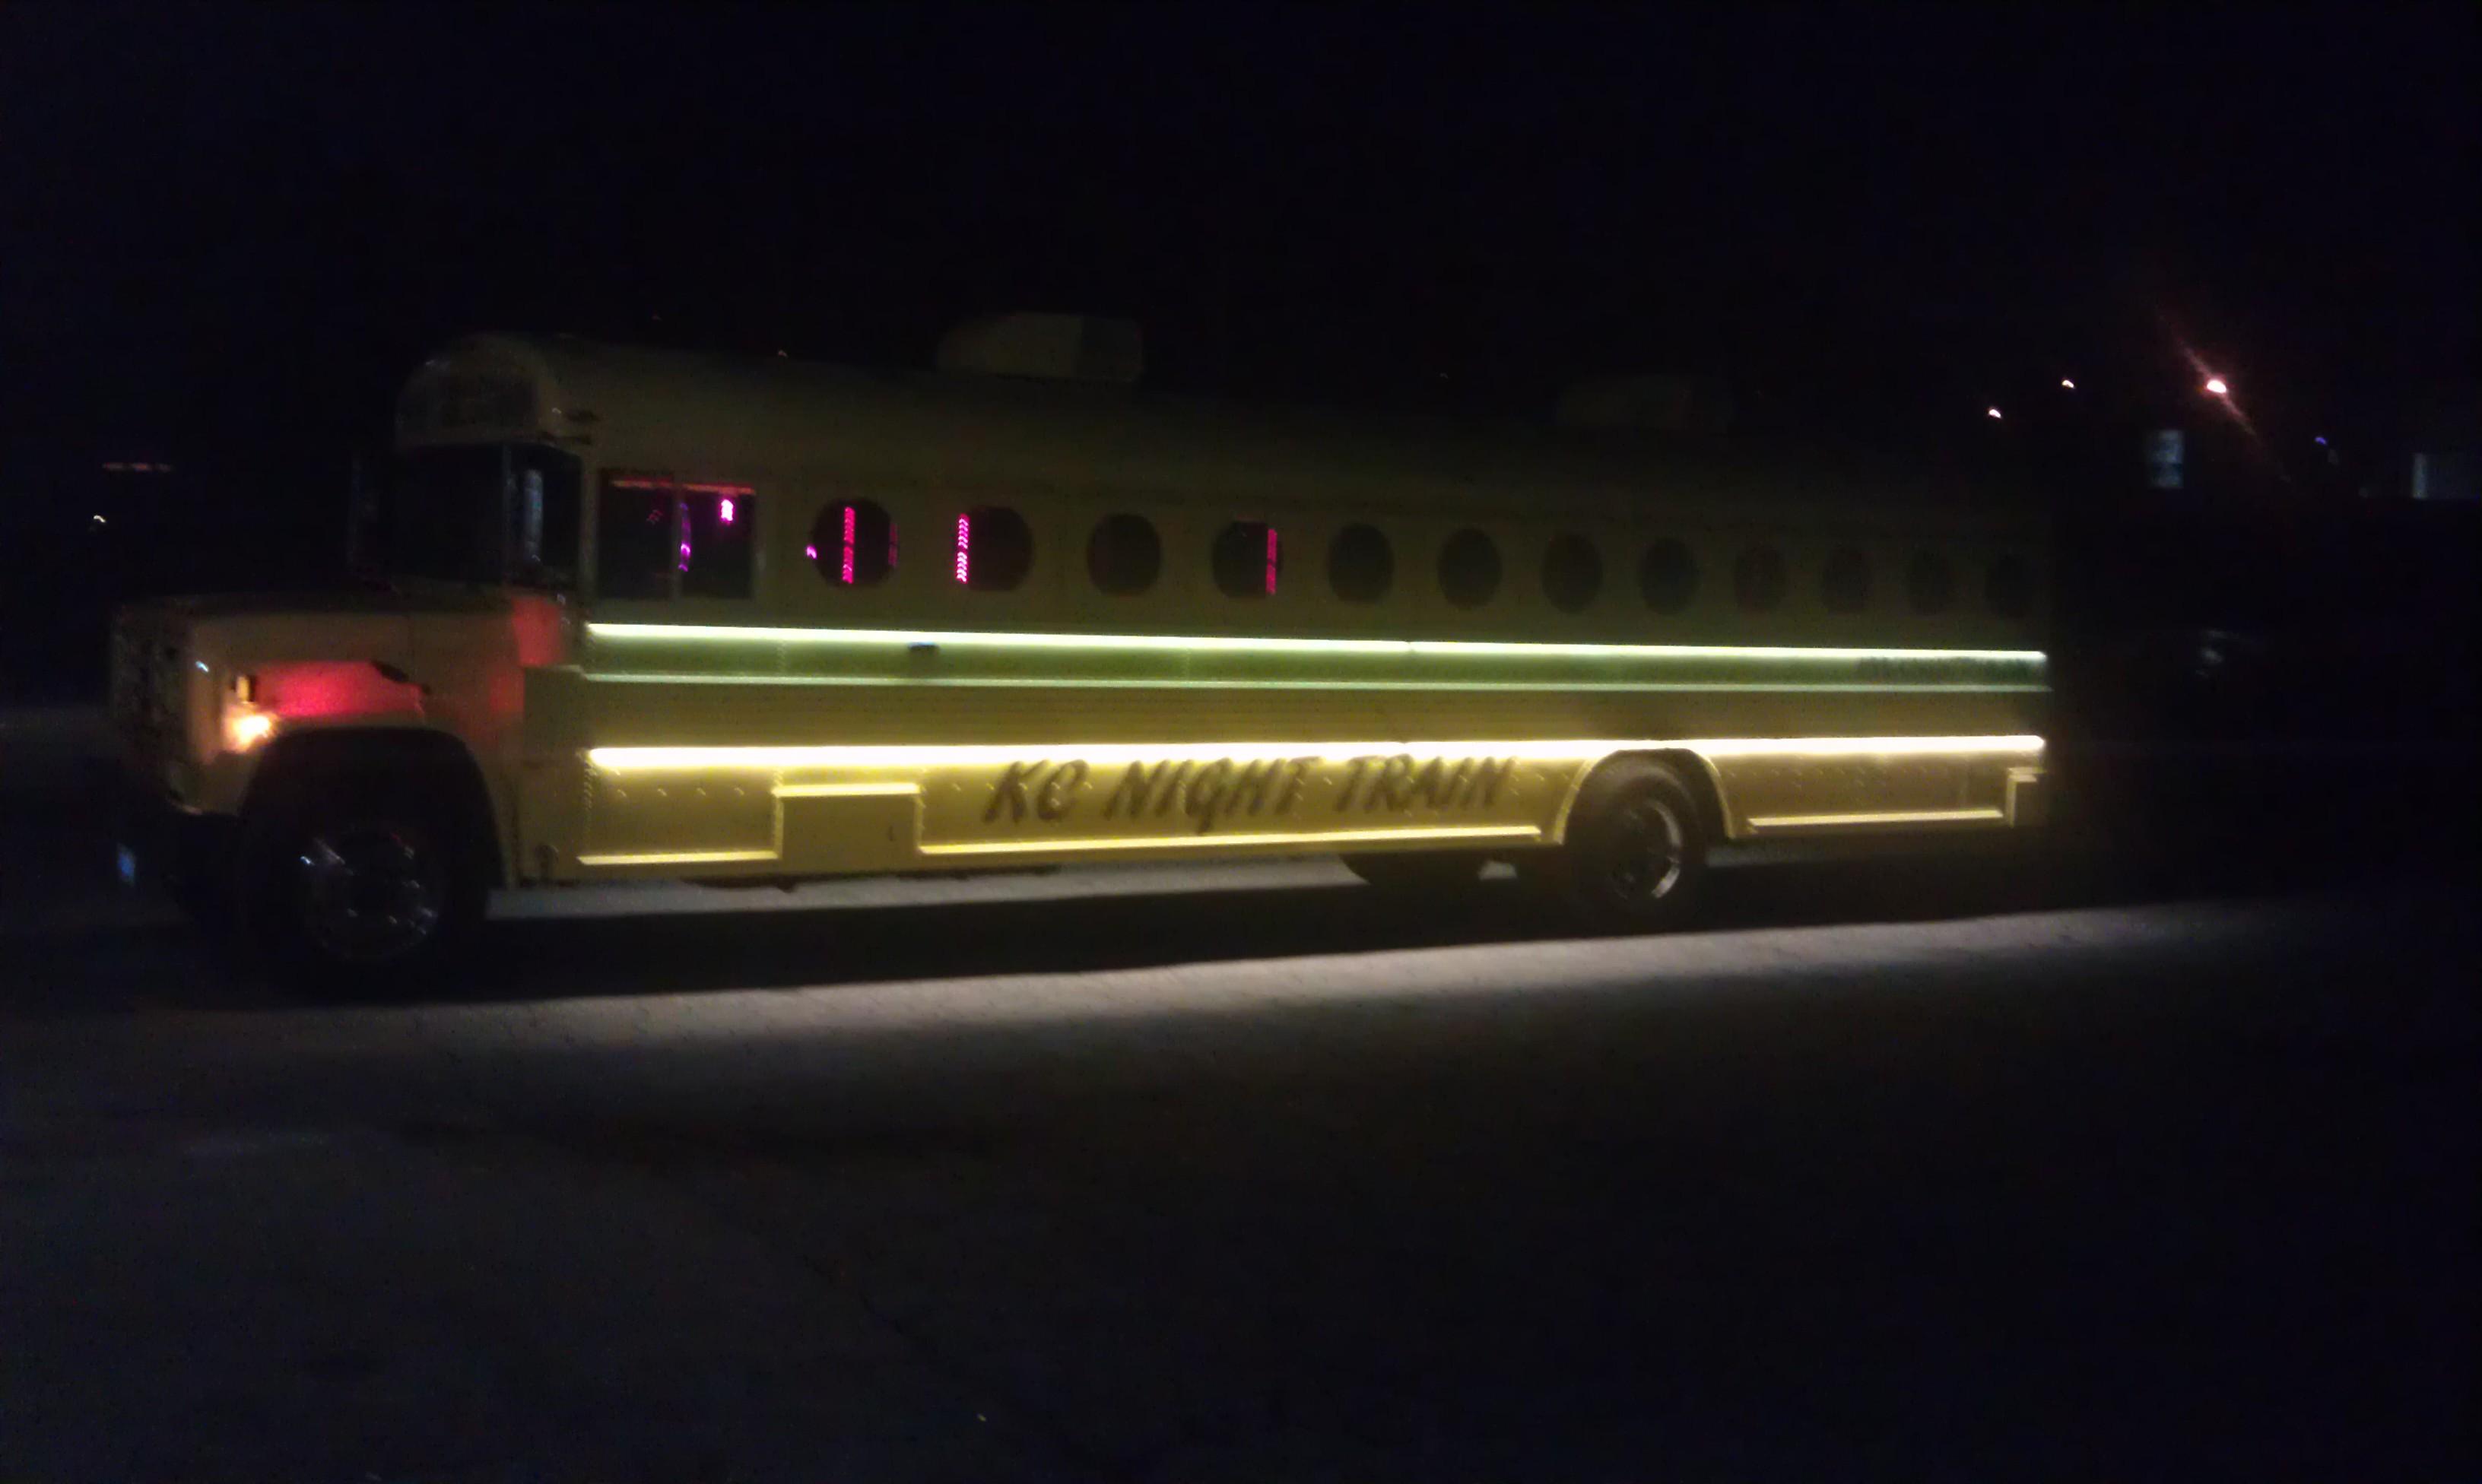 Night view of the Mellow Yellow Party Bus on the driver's side